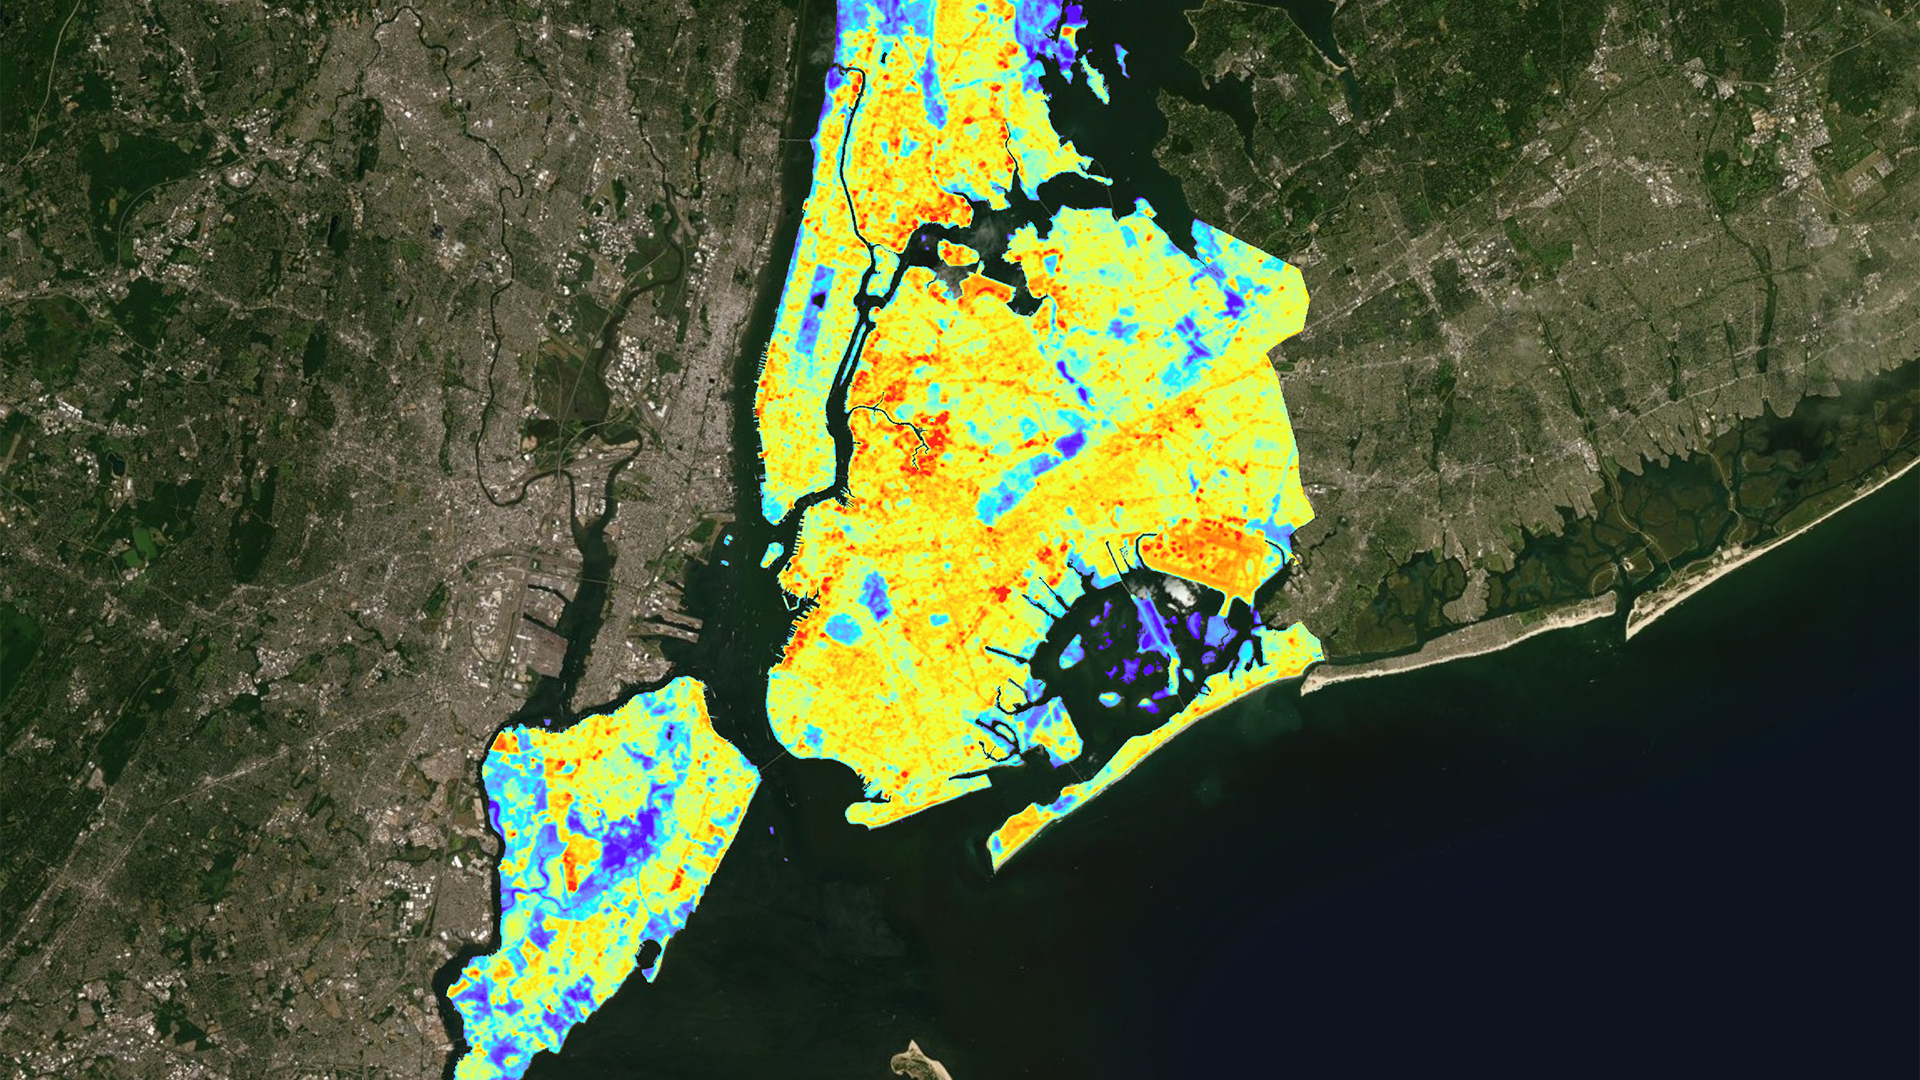 Compilation of processed provisional land surface temperature data from 1990-2019 acquired by Landsat 4-8. The City of New York, located in Southeast New York State is displayed. Blue hues represent areas where temperatures are less than the average mean. Orange to red hues show areas equal to or higher than the mean temperature. Areas in red are hotspots within the city. These are areas where policymakers should focus green initiatives on to reduce extreme heat.Keywords: Landsat, Urban Heat, Hotspots, New York City, Extreme Weather